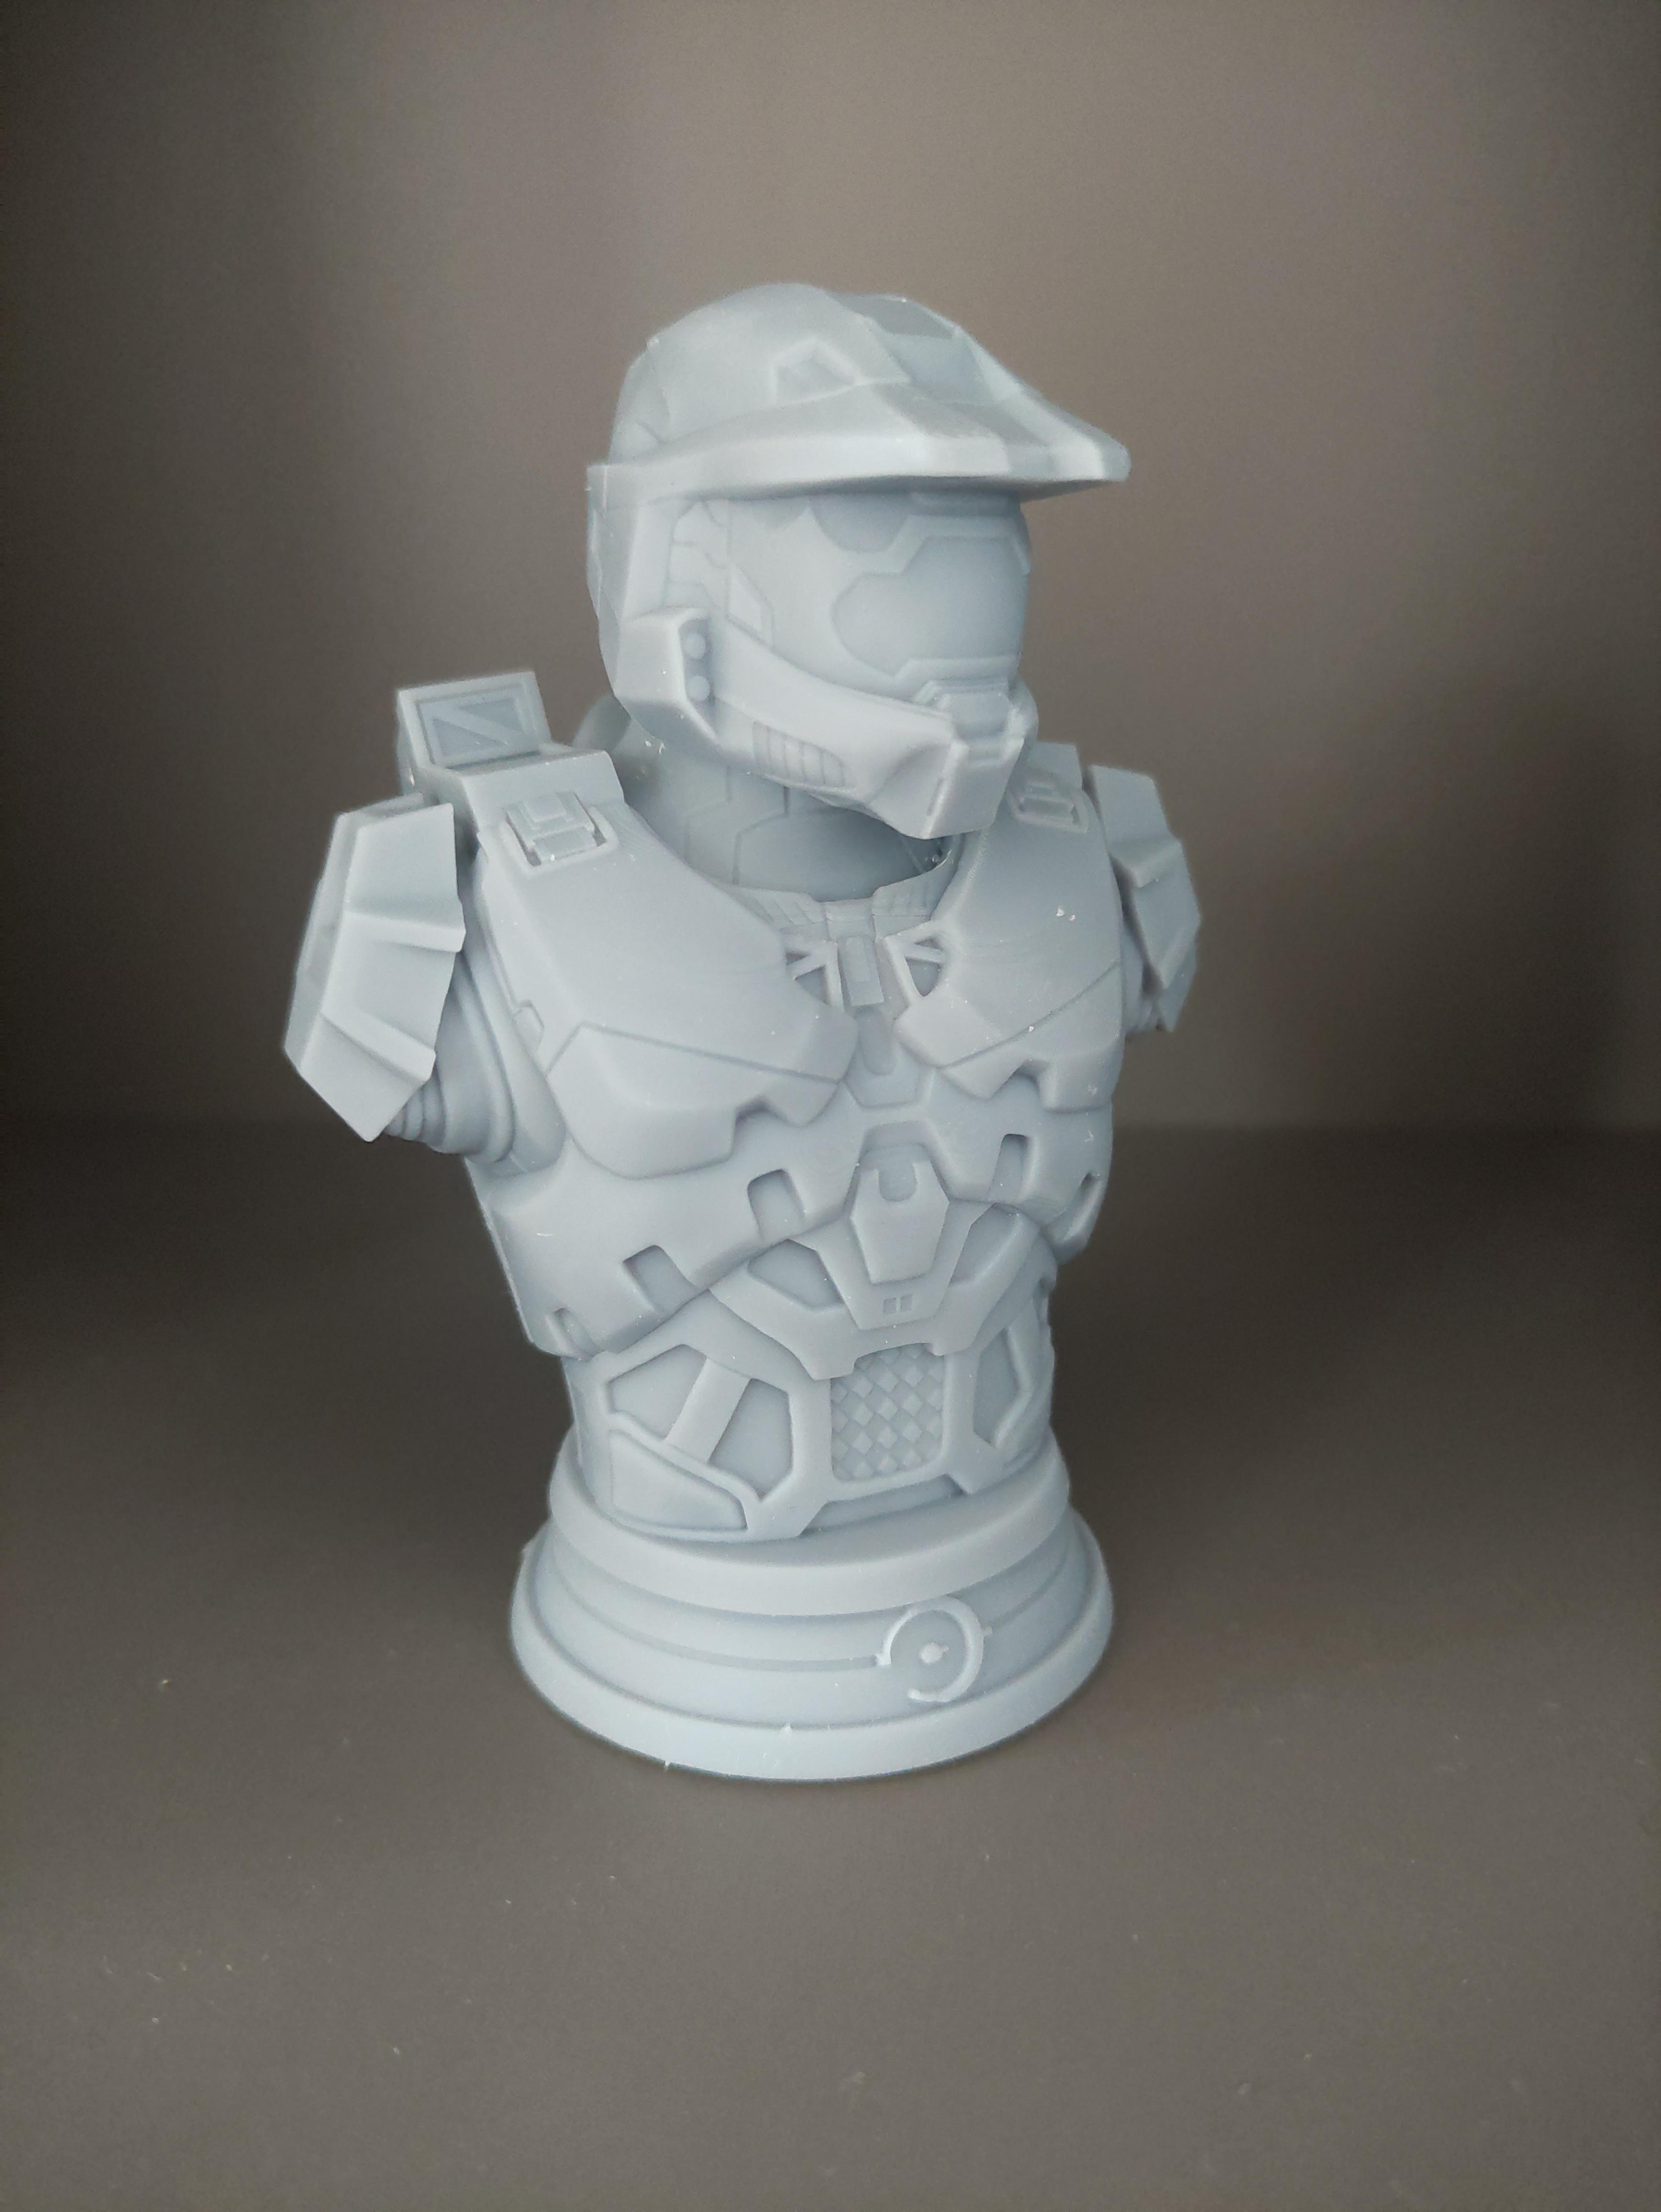 Master Chief Bust - Halo (Pre-Supported) - Printed on Elegoo Mars 2
Awesome quality  - 3d model